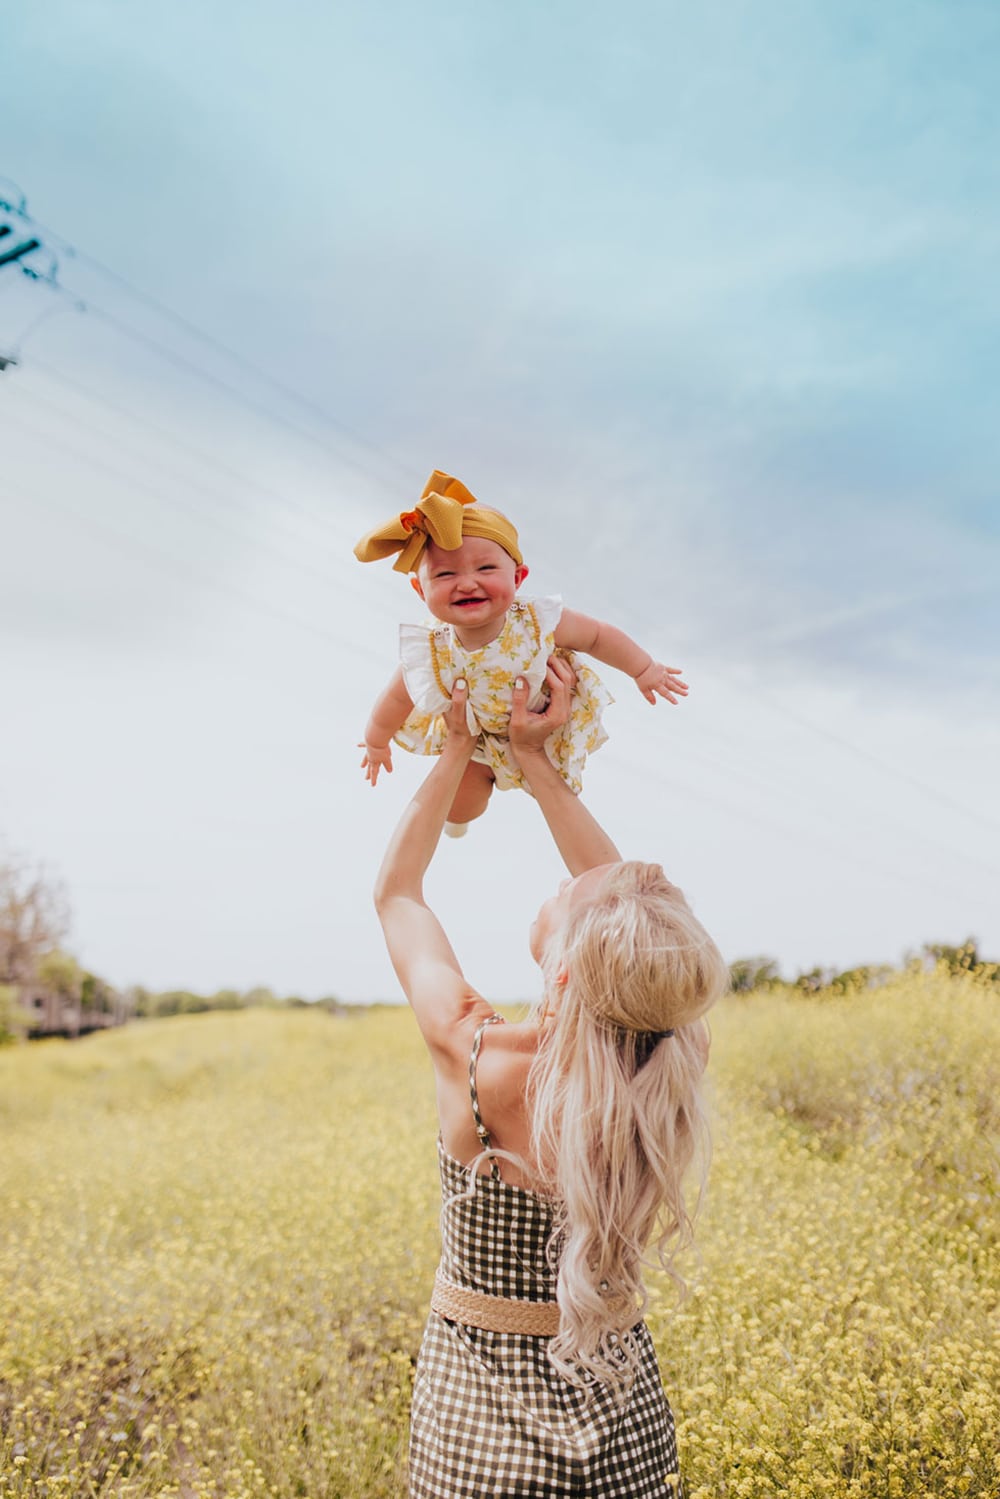 family photo ideas - mommy and me photography tips and poses - holding baby in air - yellow flower field